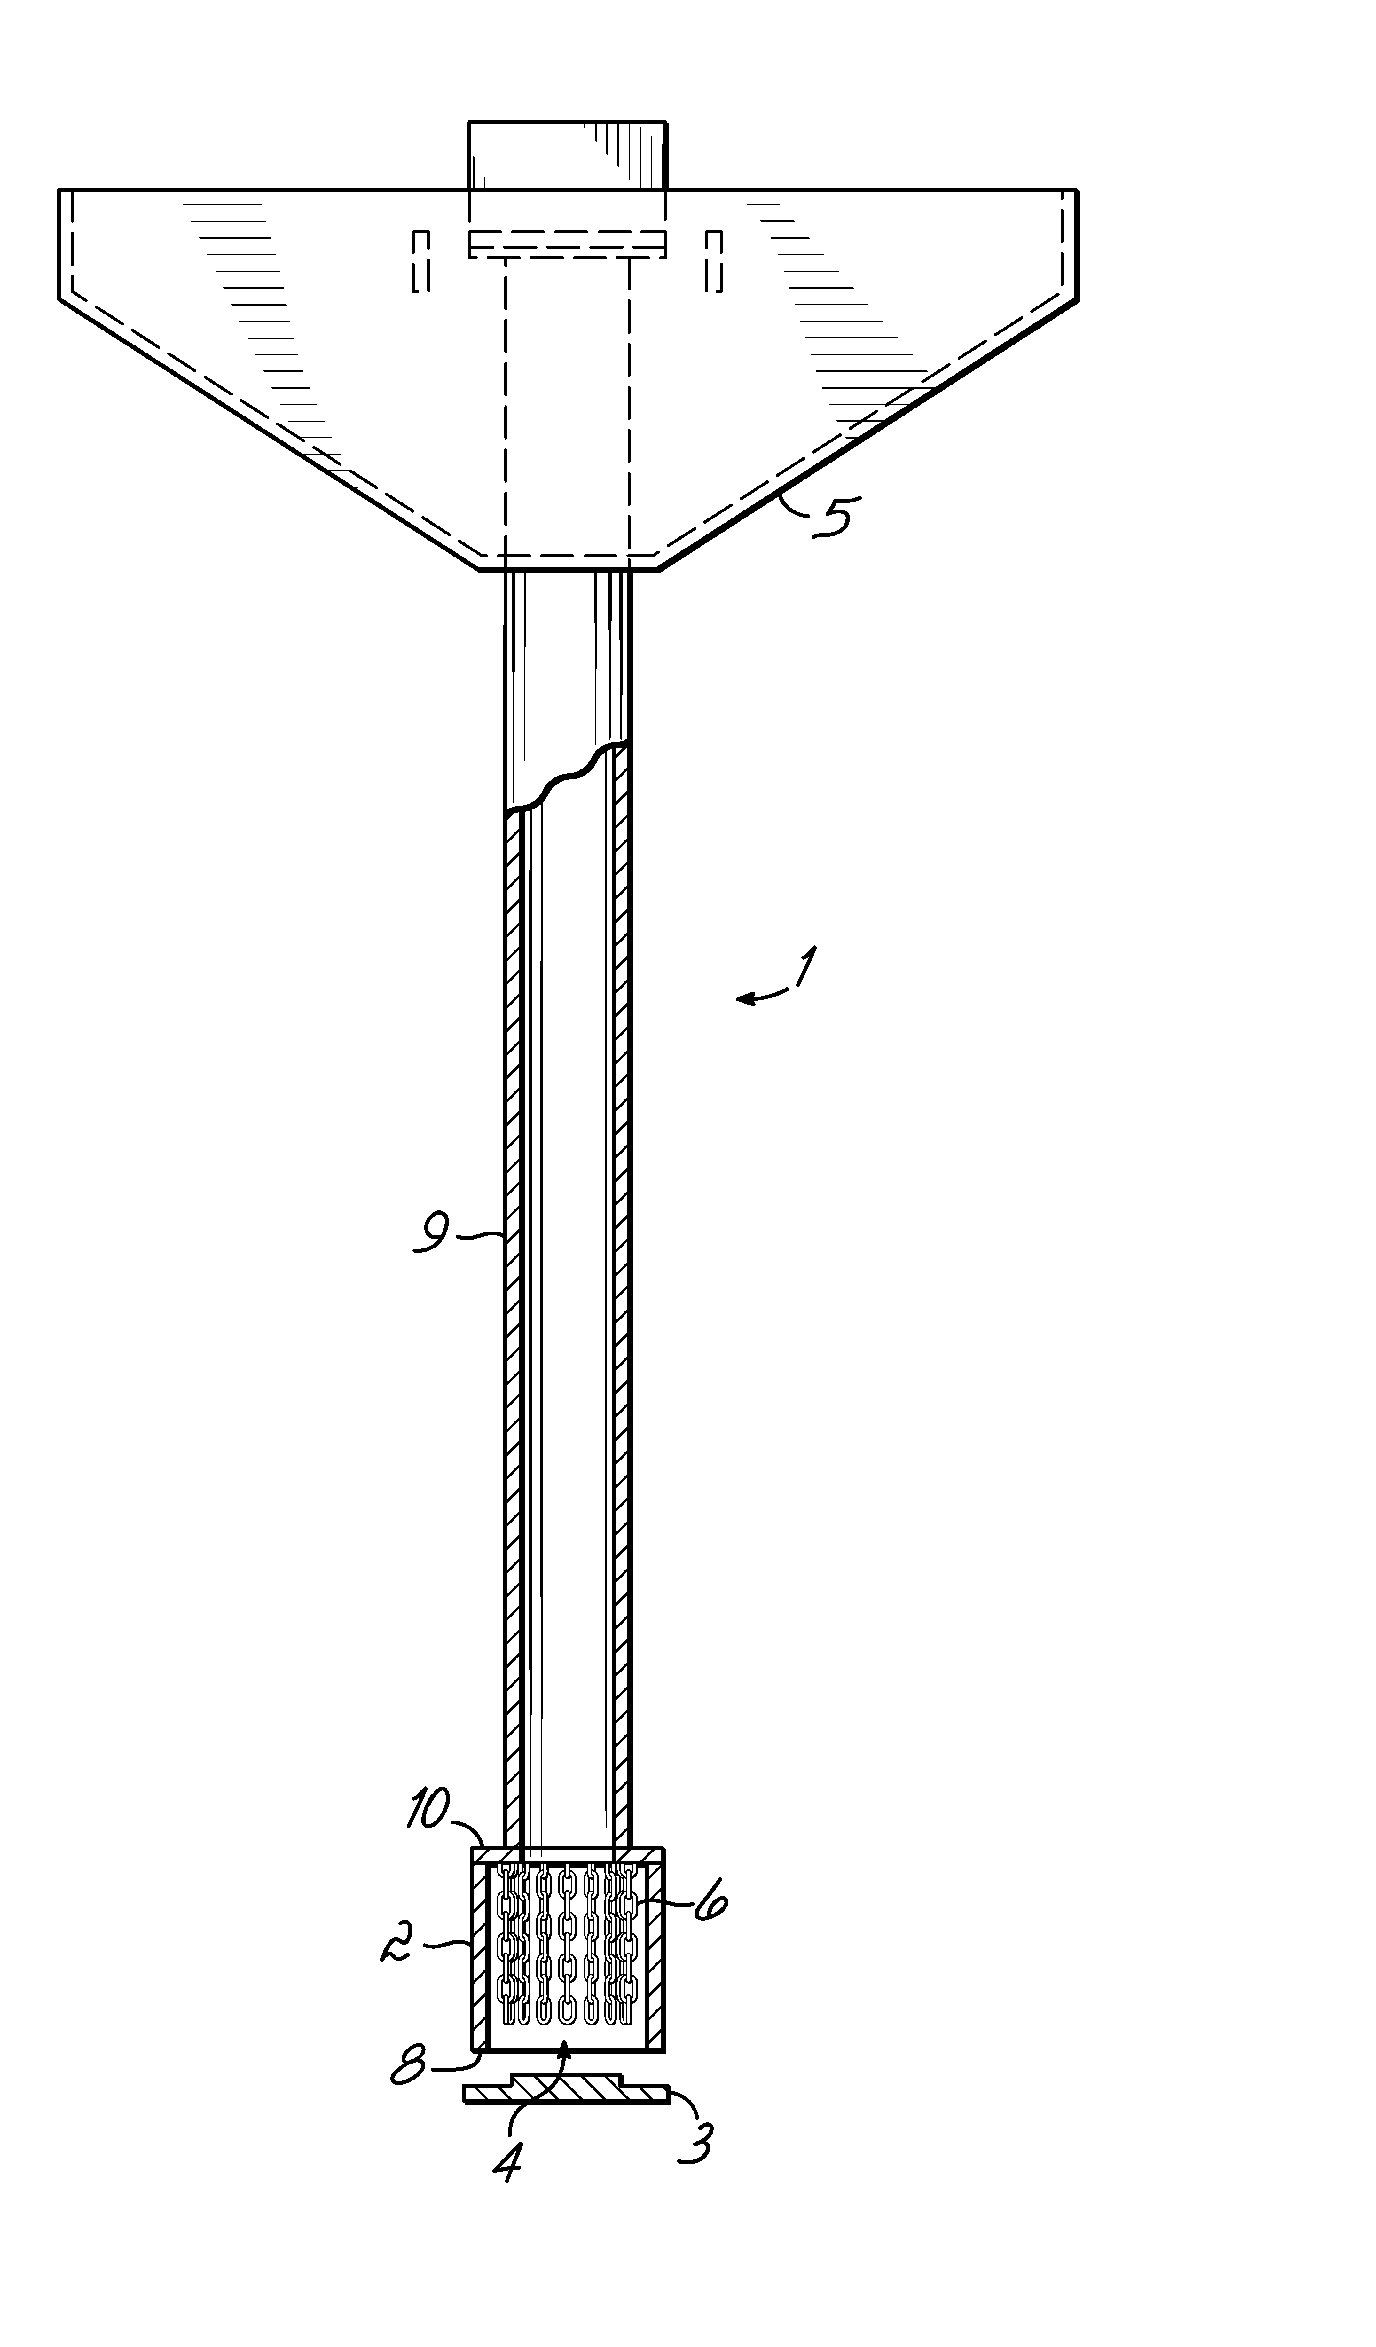 Method and apparatus for creating support columns using a hollow mandrel with upward flow restrictors